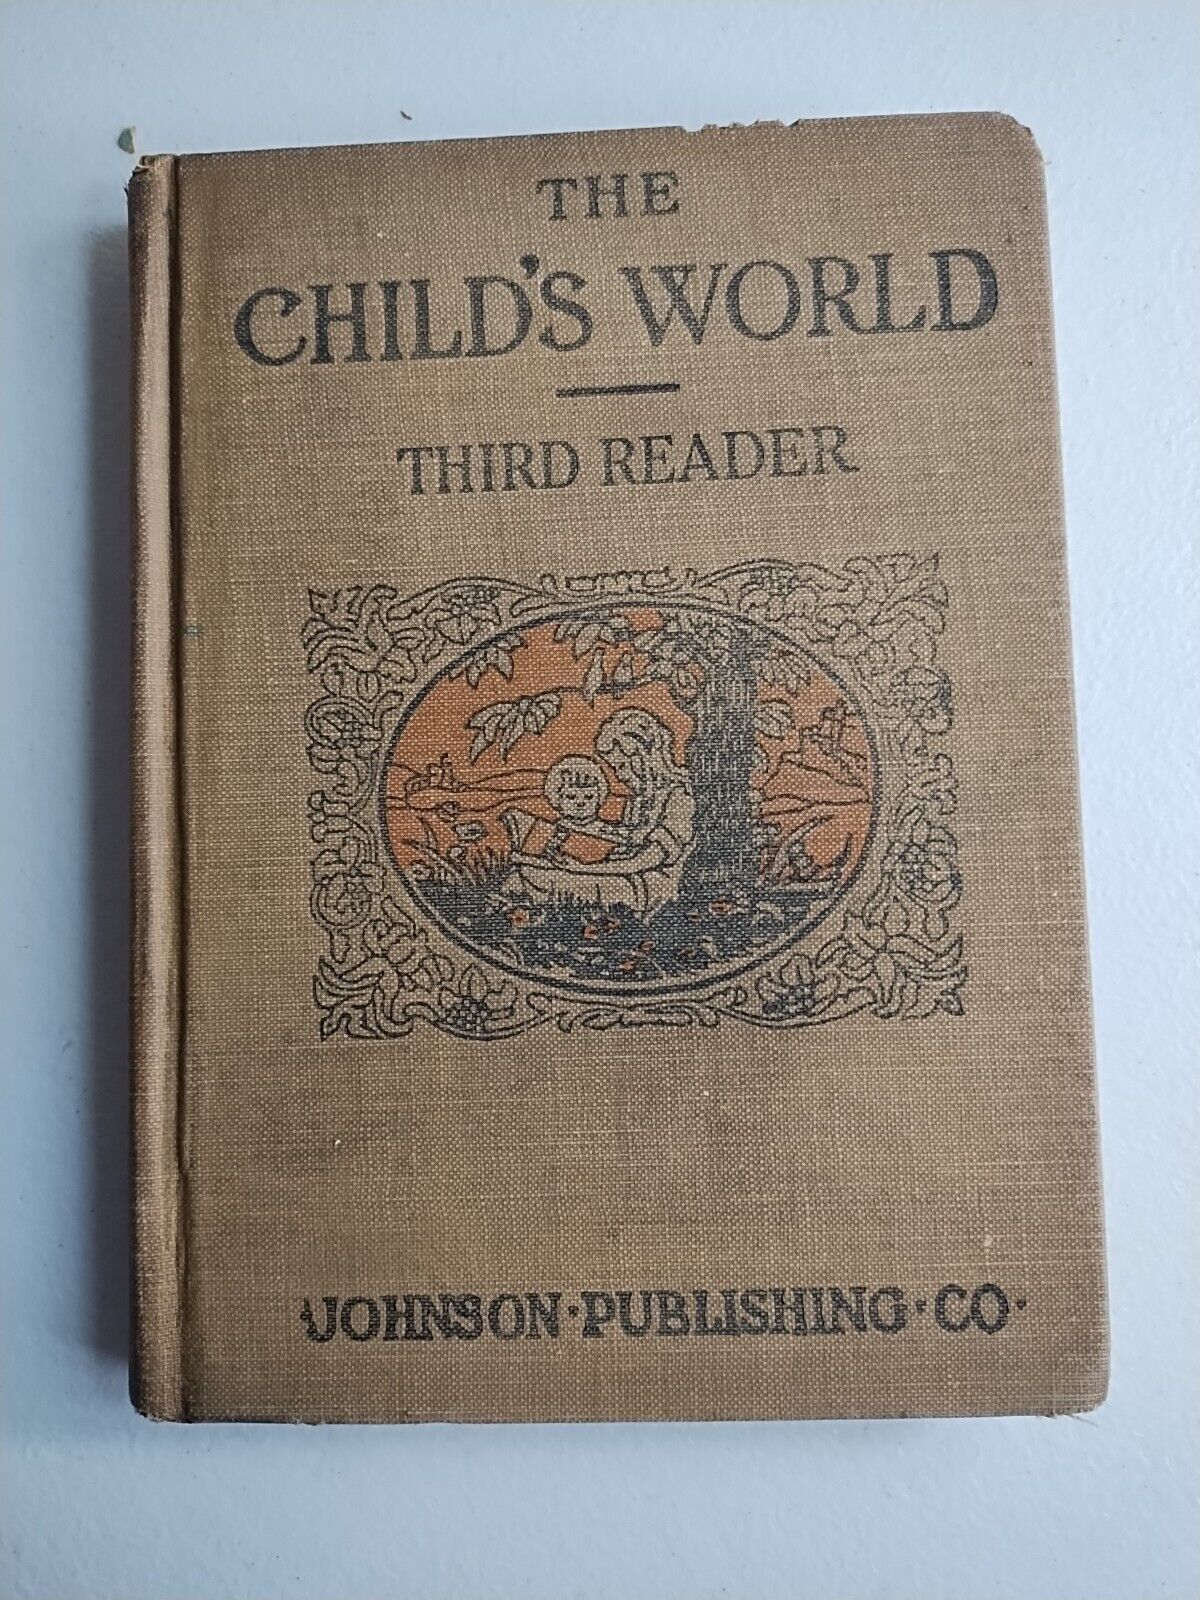 The Child\'s World, Third Reader by Withers 1917 Edition Hardcover Book Antique 